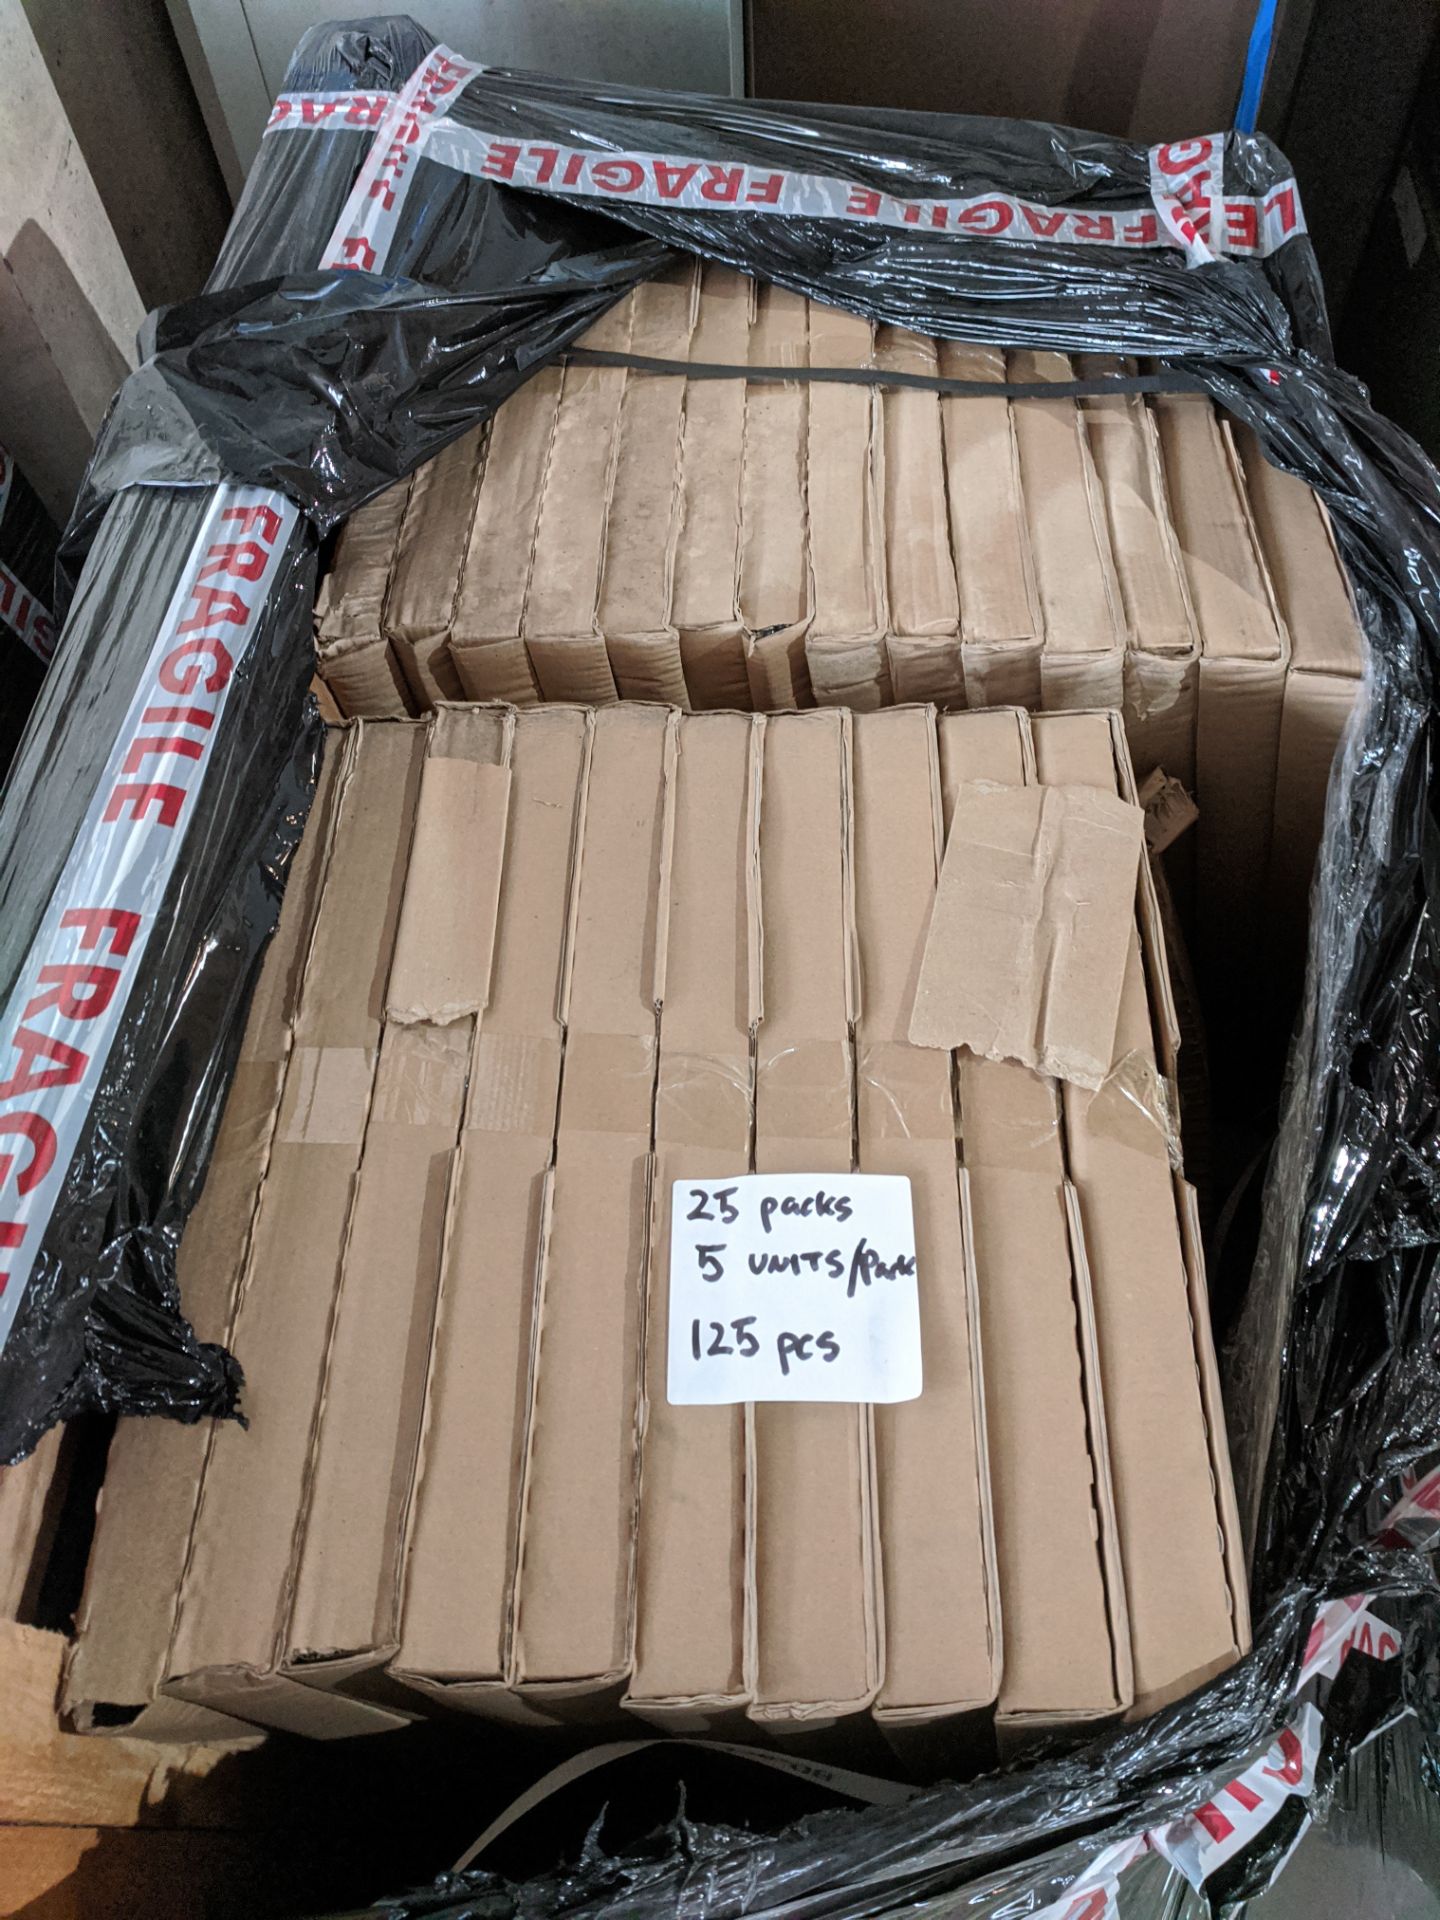 Pallet containing 150 Brand new Cooke & Lewis Wall mirror - new and sealed rrp £12.99 each - 150 pcs